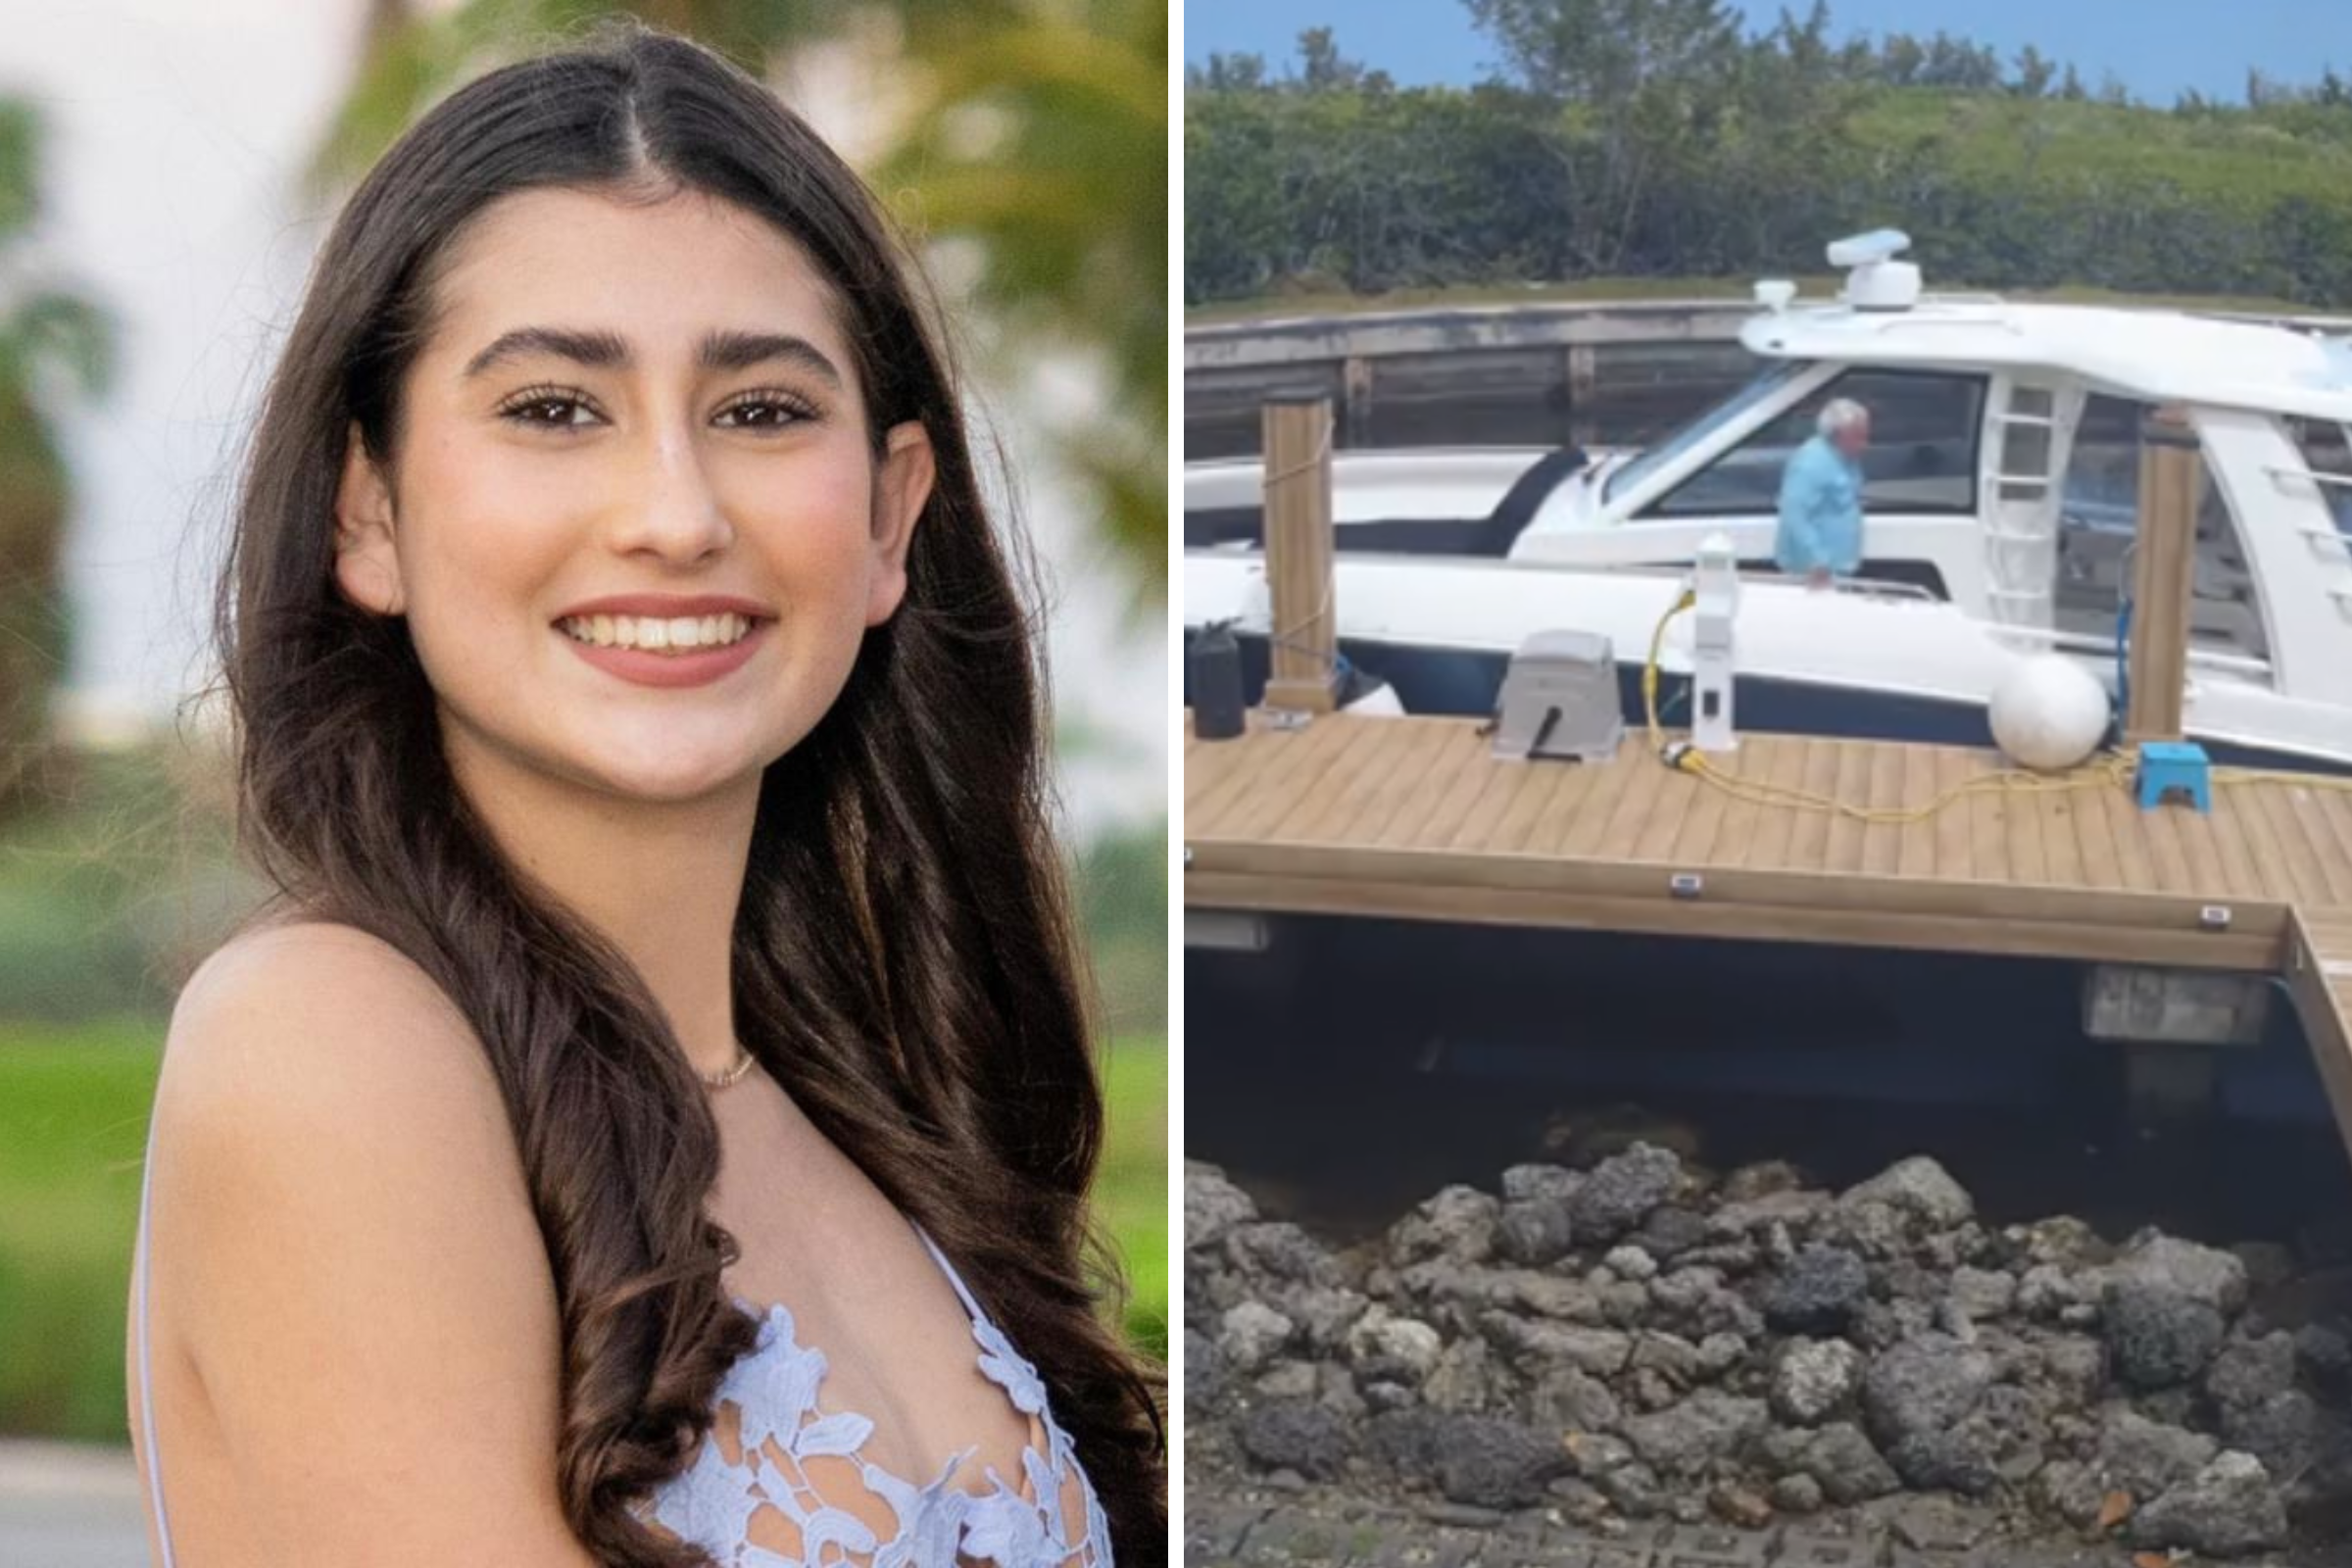 Ella Adler's death: What is happening to boater who killed Florida teen?